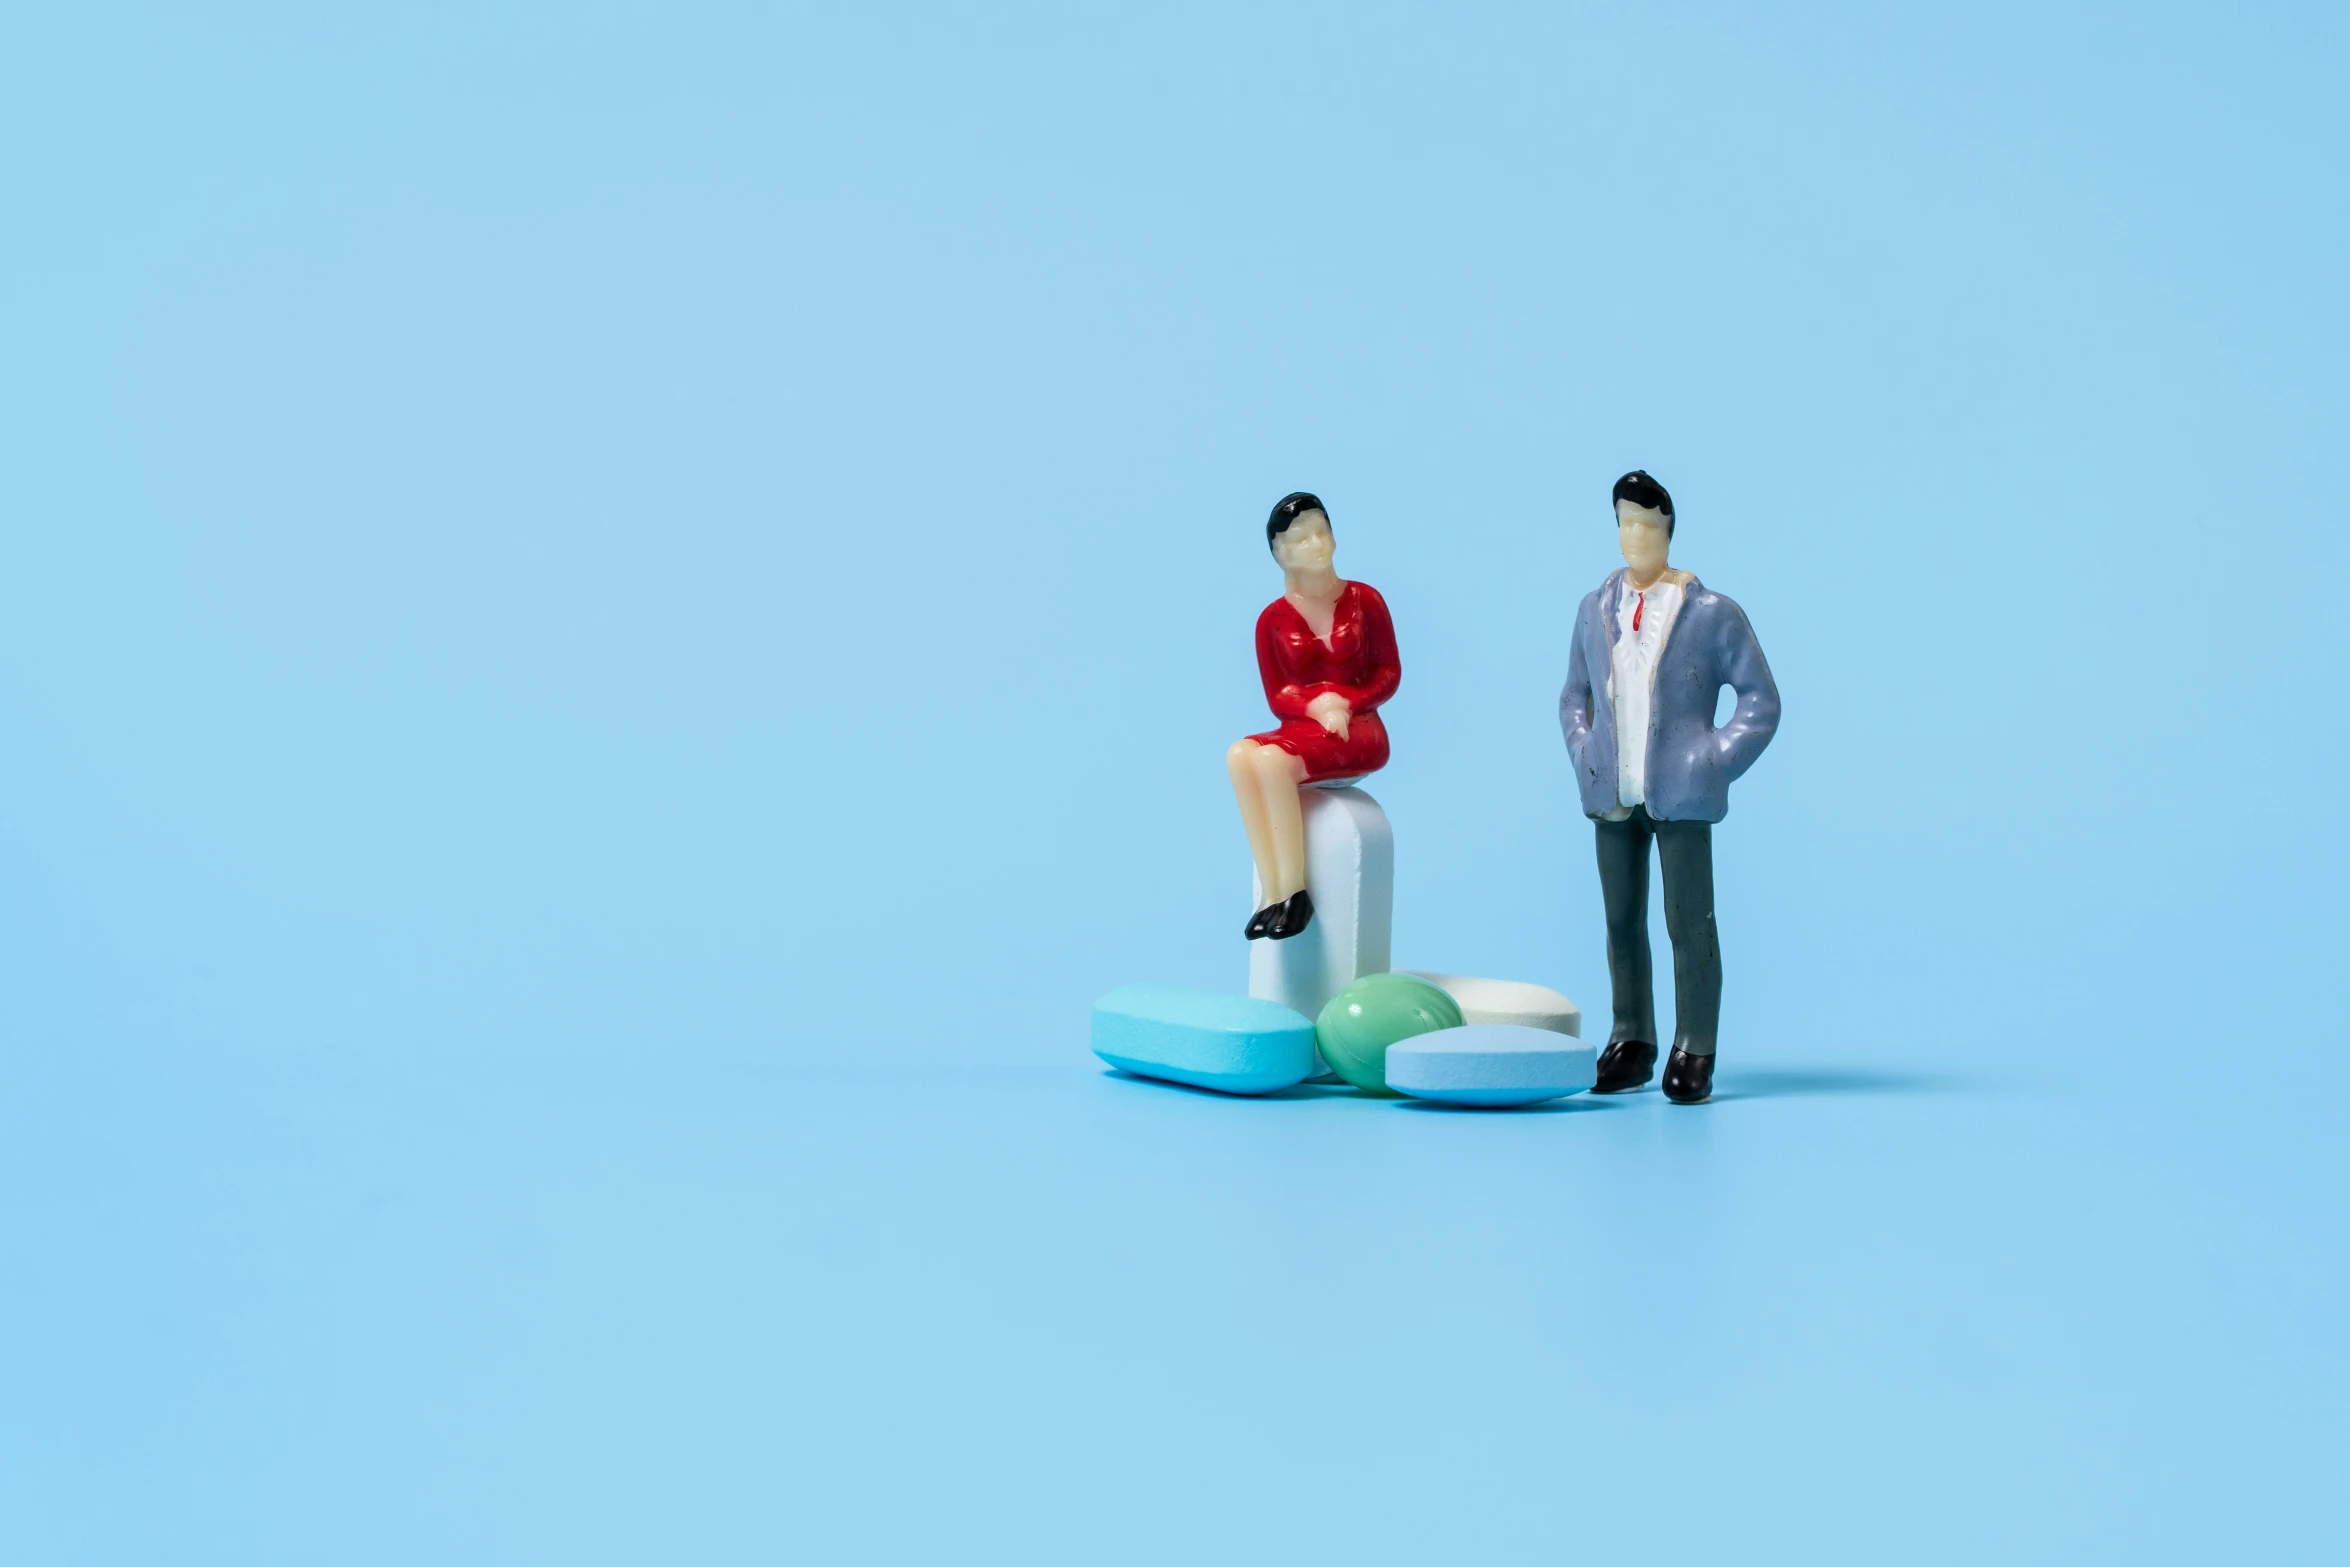 two figurines one with the woman sitting on a table, the other wearing a business suit